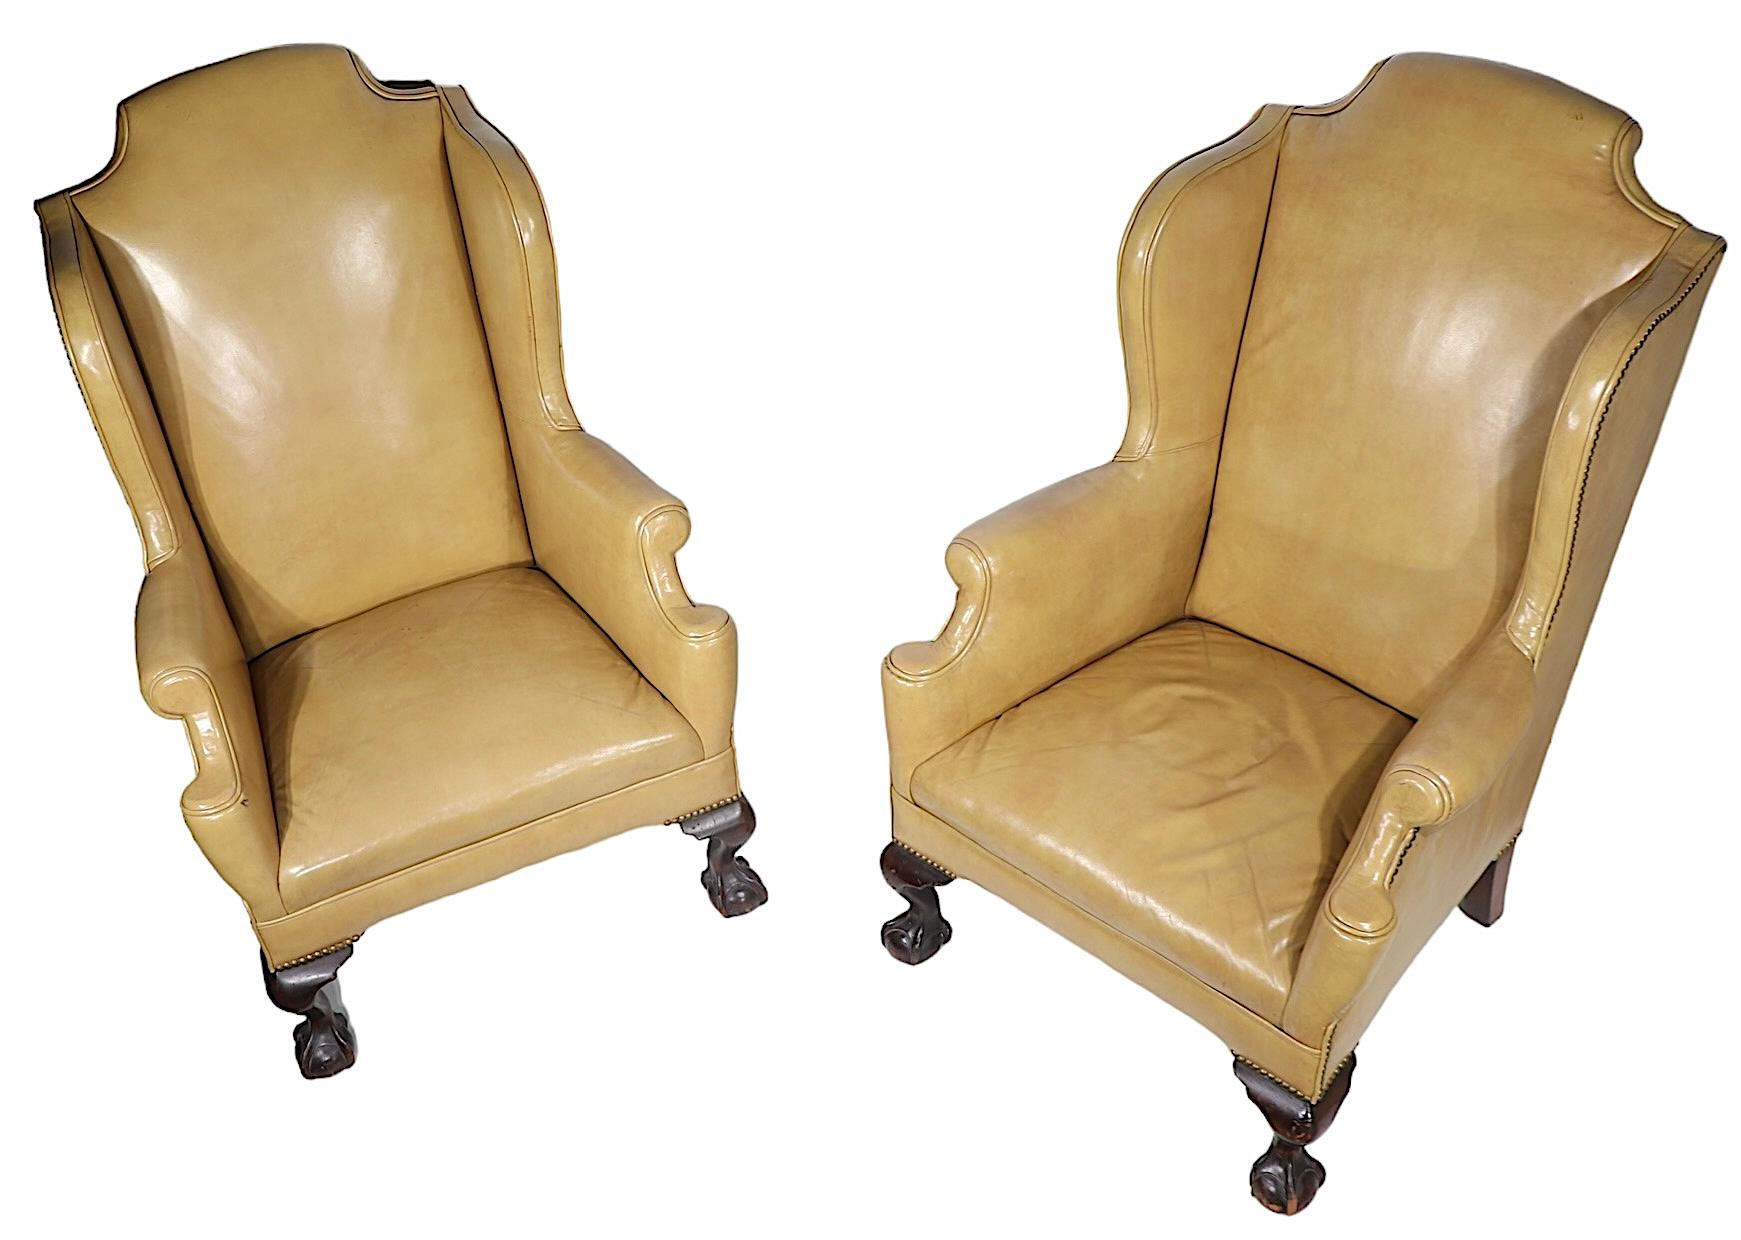 American Pr. Leather Wingback Chairs with Ball and Claw Feet and  Nailhead Studs  For Sale